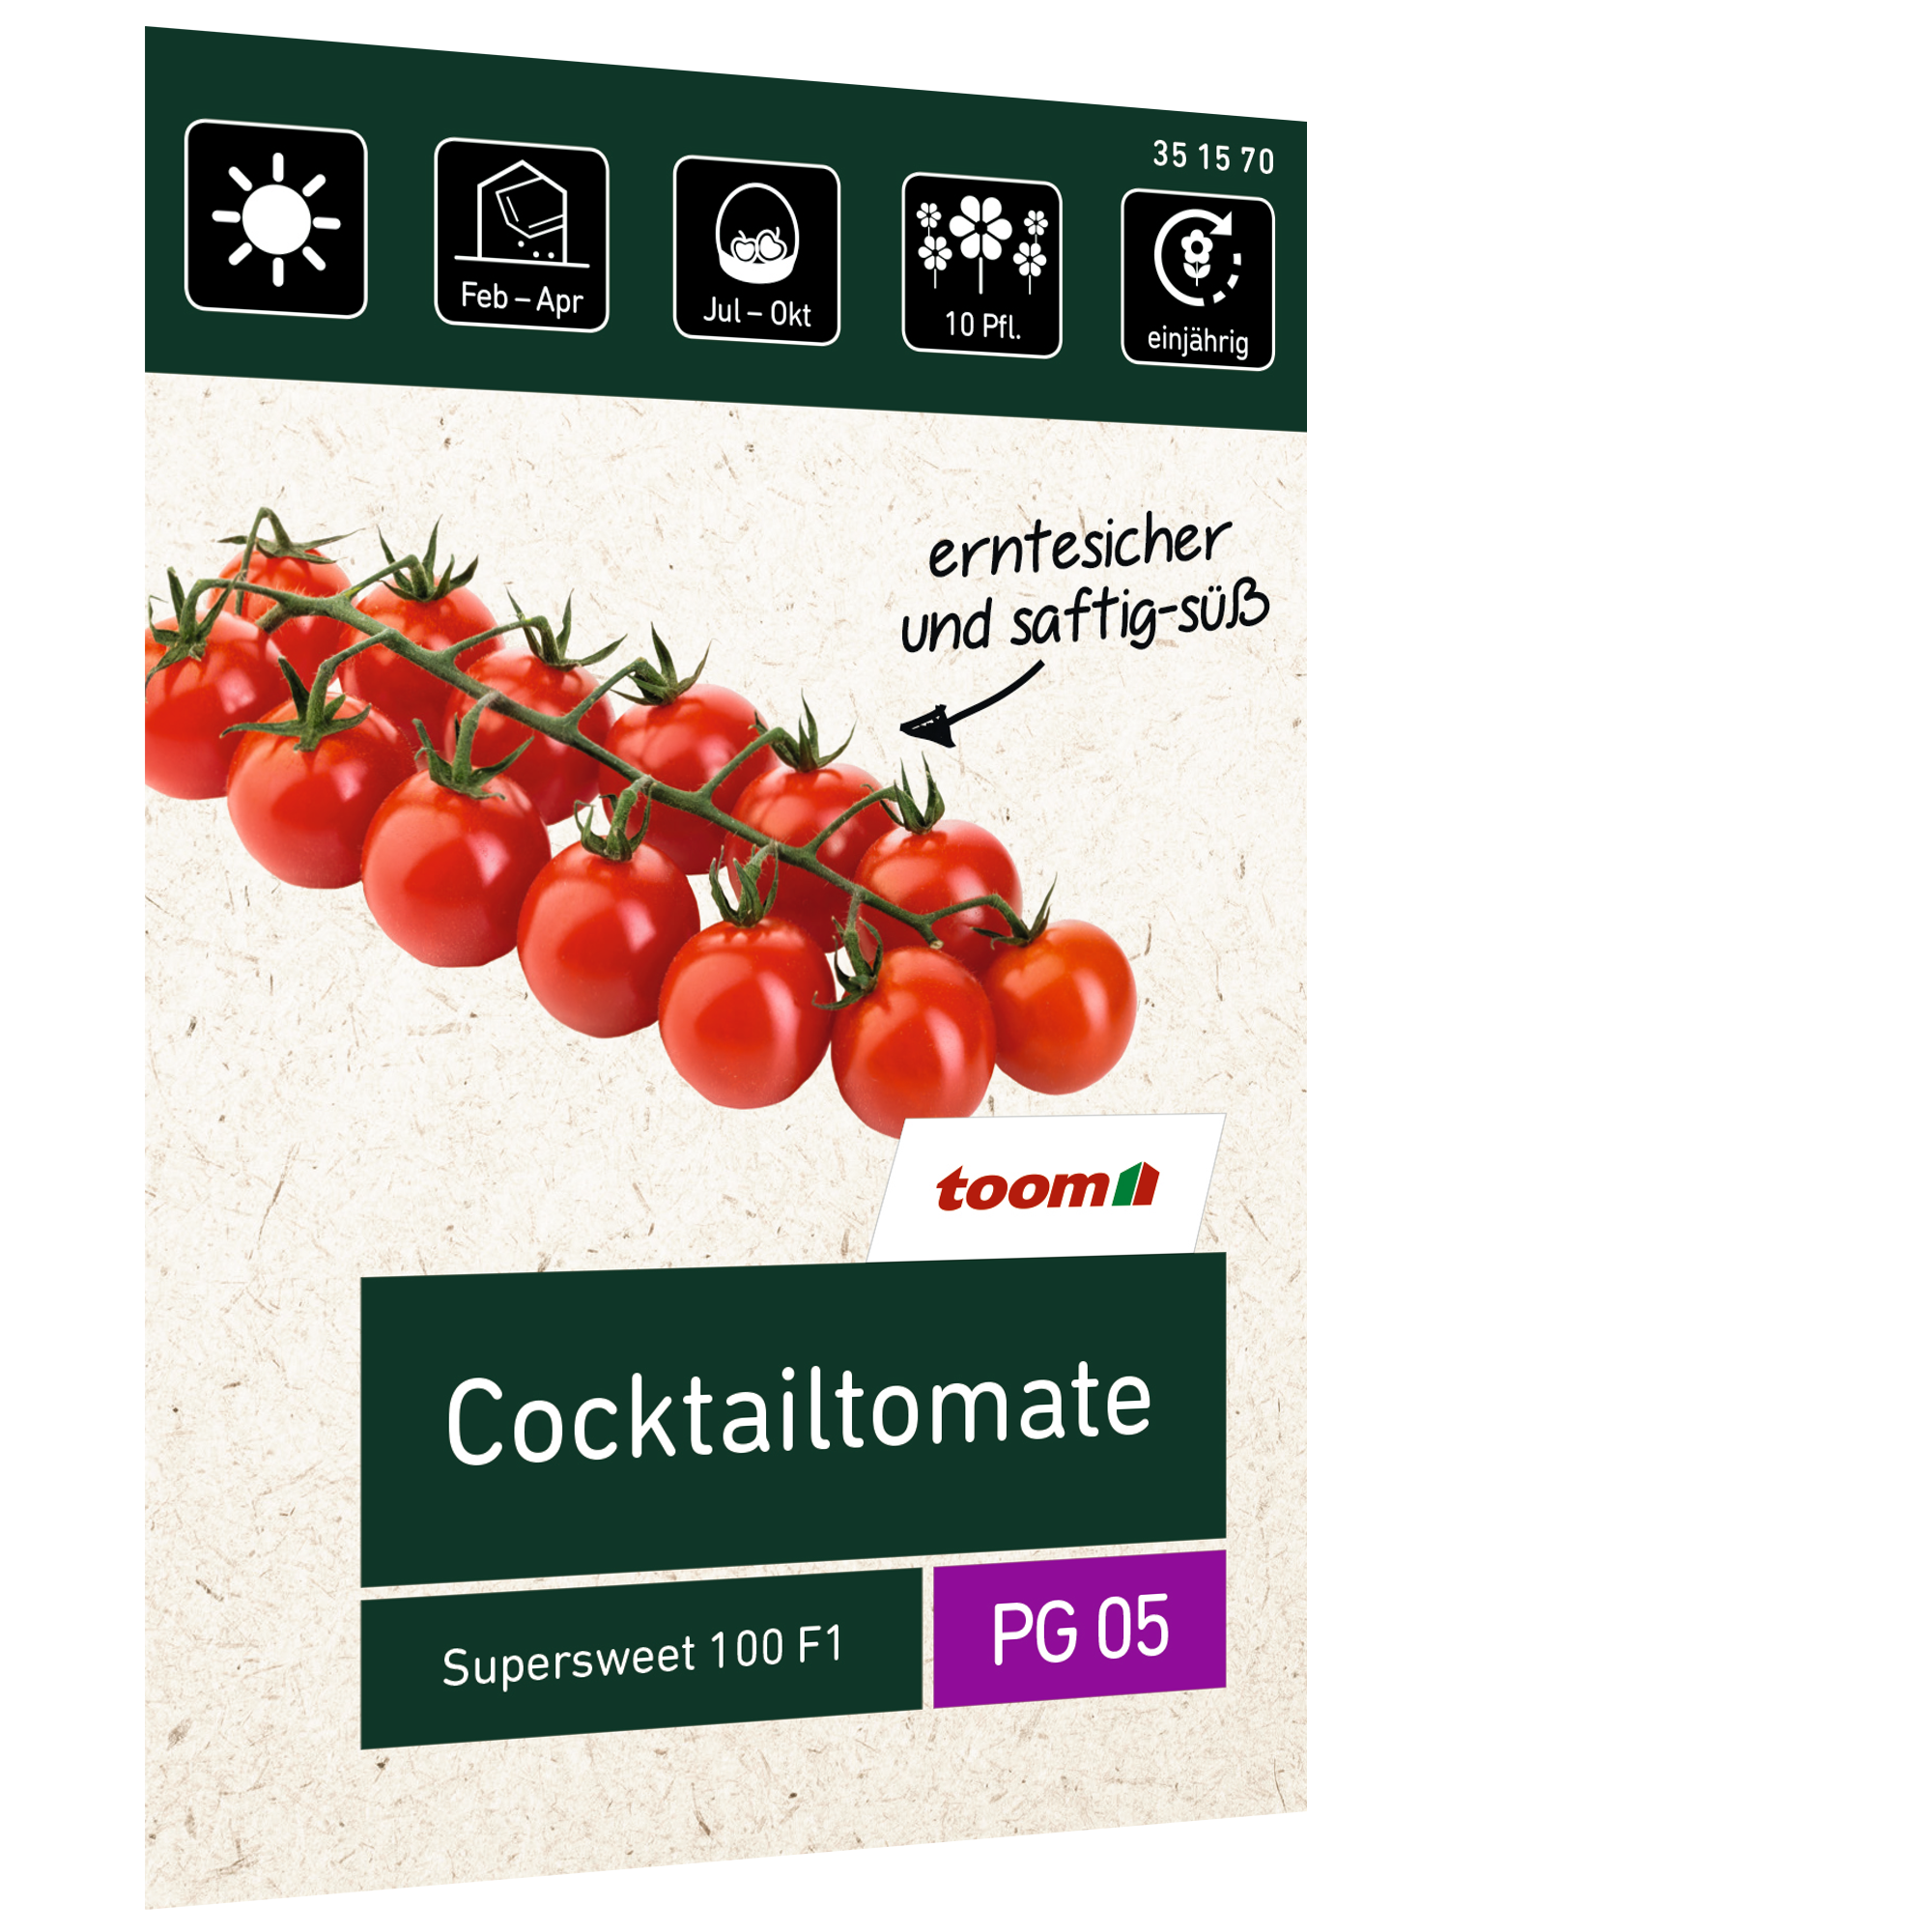 Cocktailtomate 'Supersweet 100 F1' + product picture